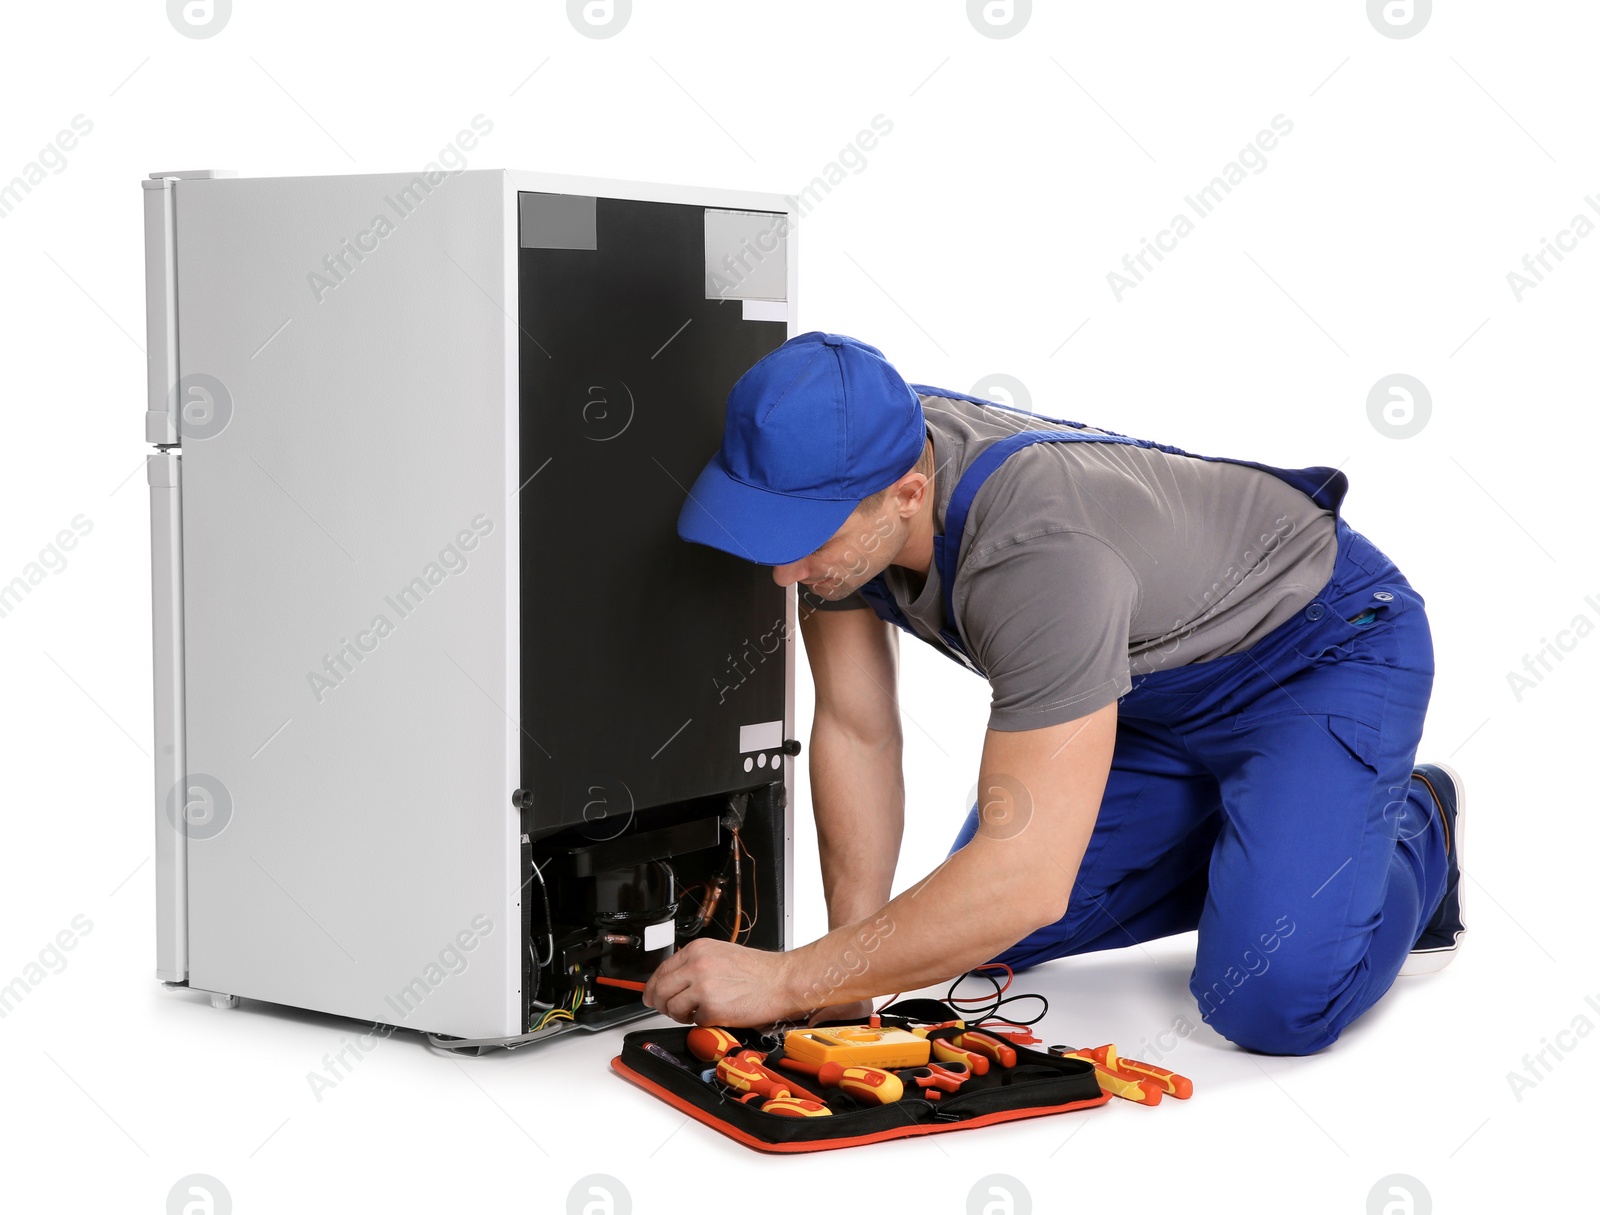 Photo of Male technician in uniform repairing refrigerator on white background